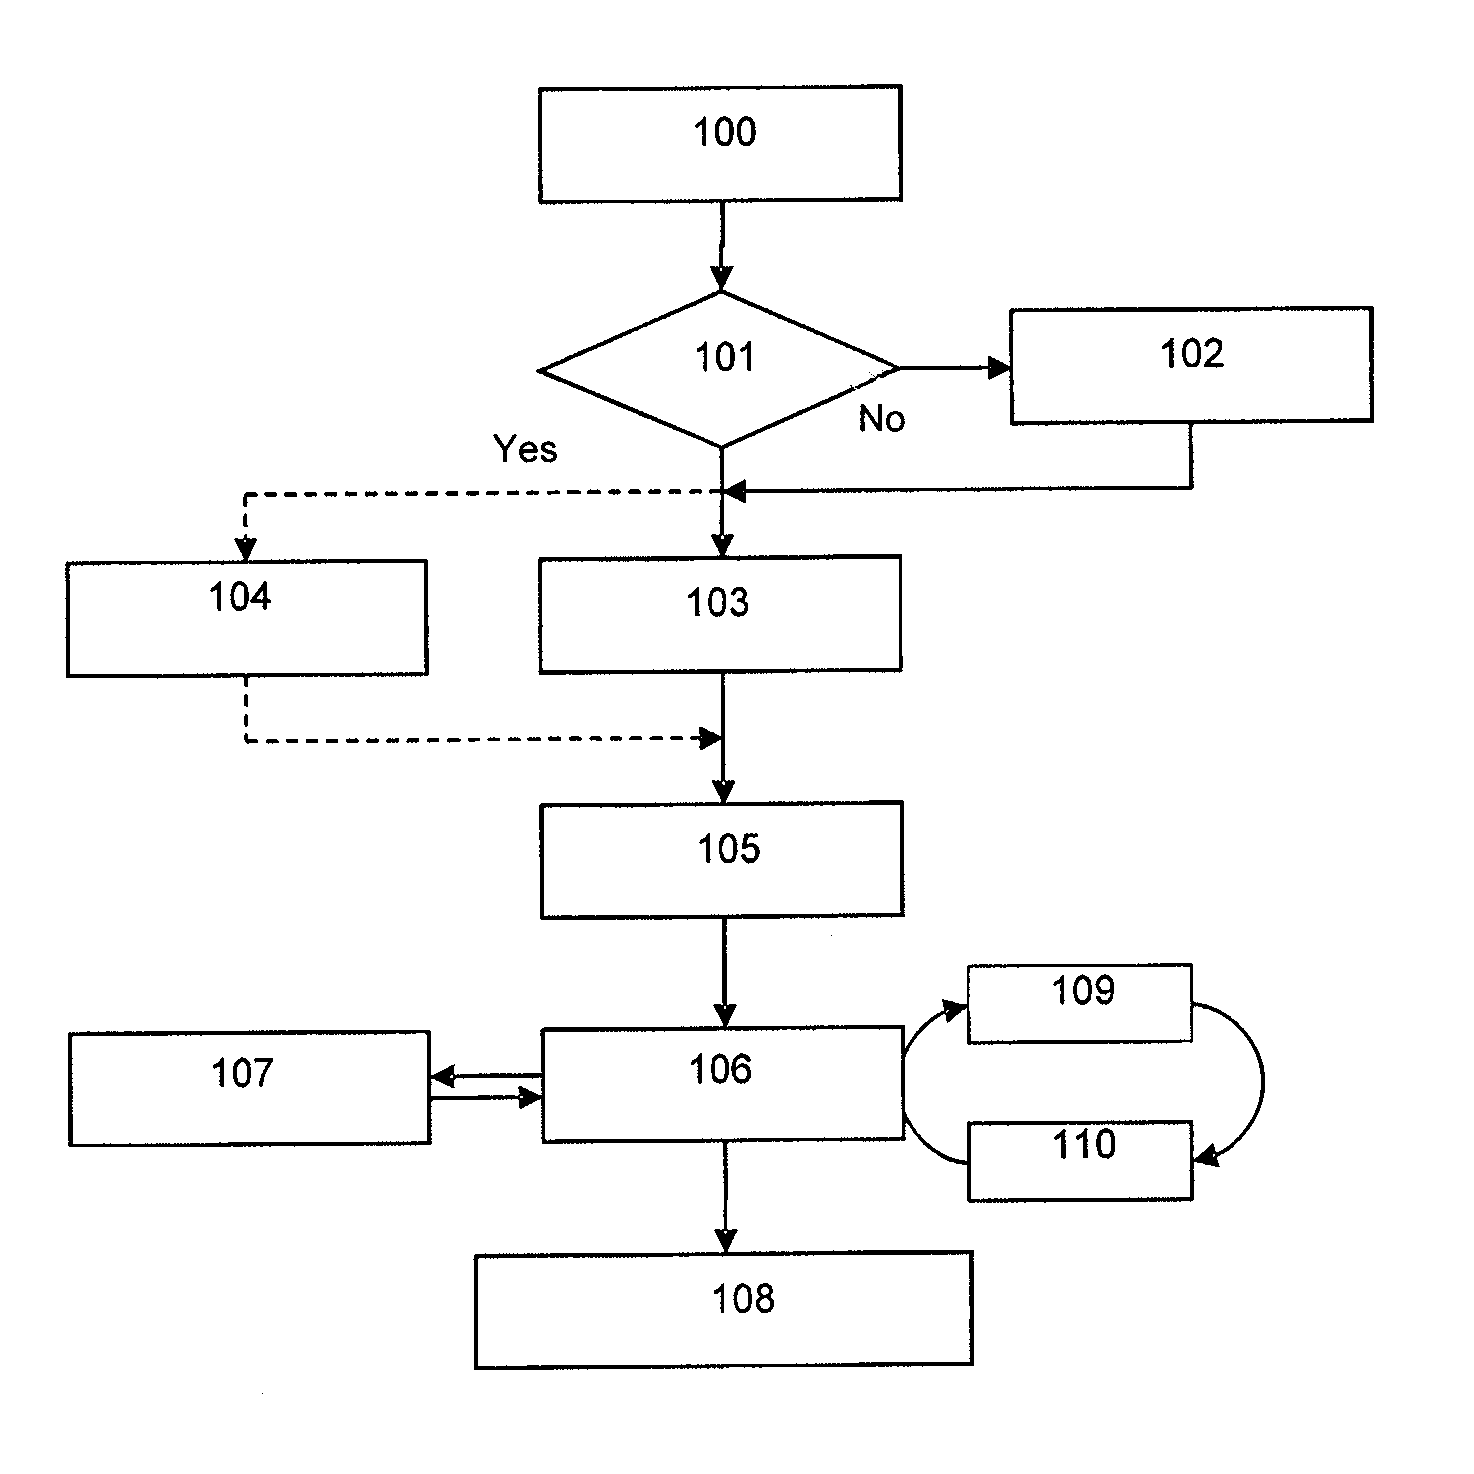 Method for Selecting a Motor Vehicle